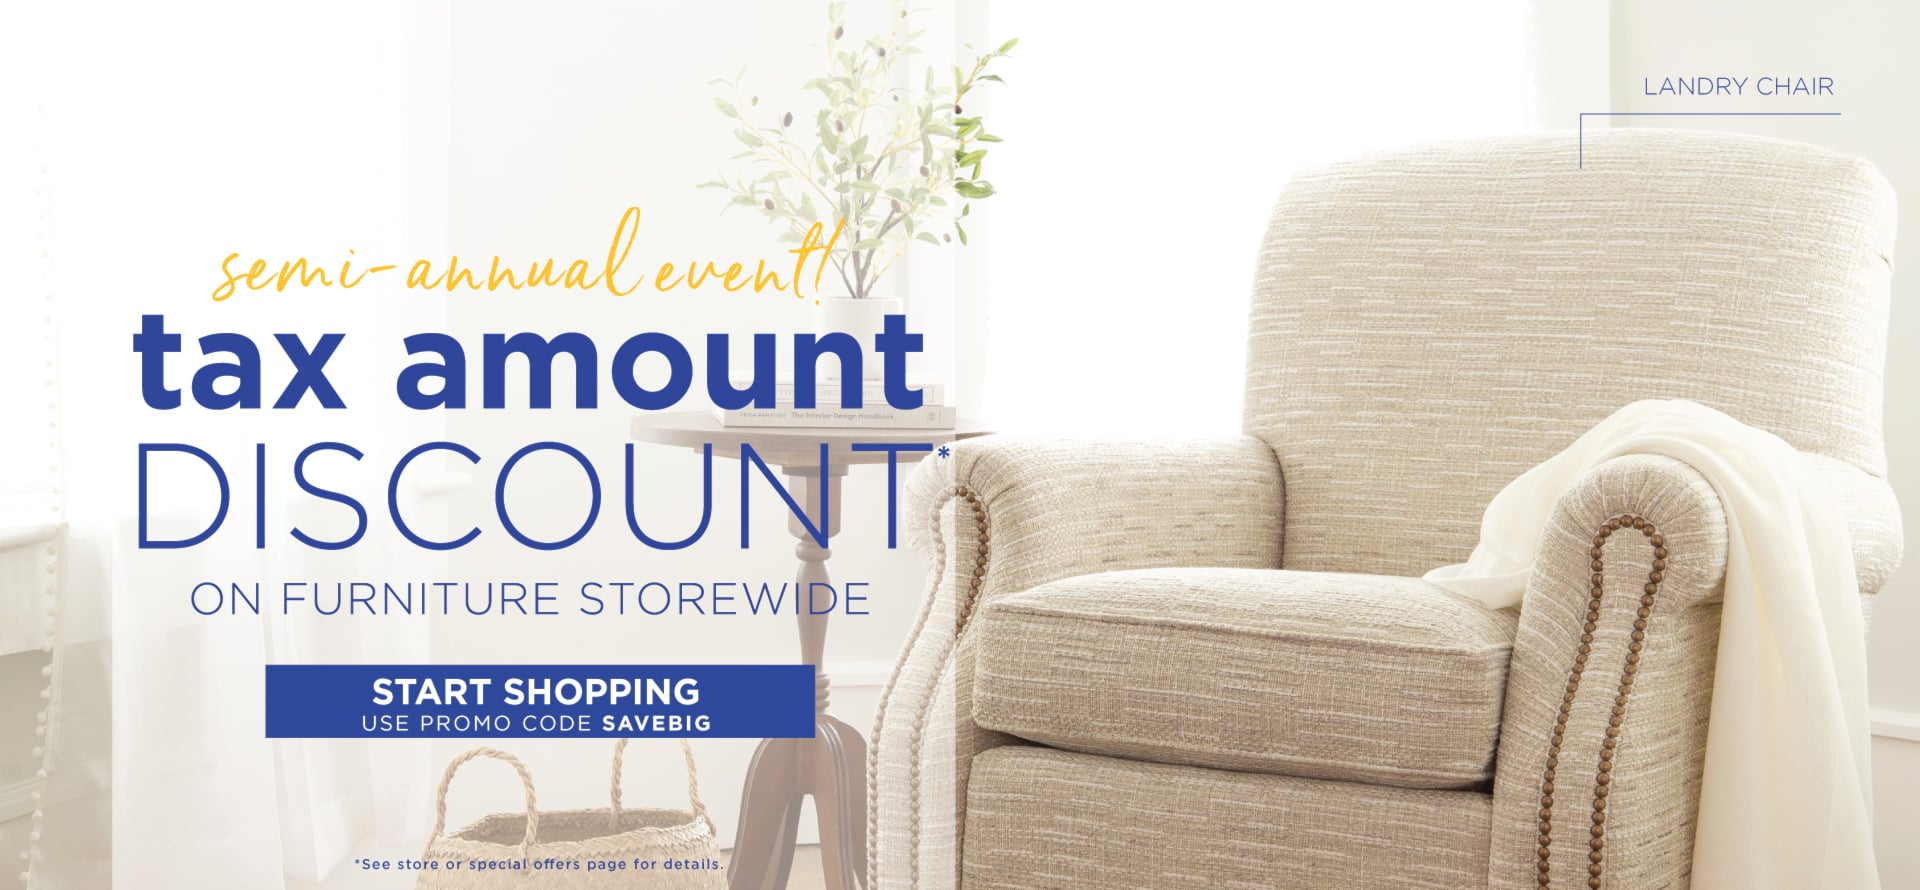 Tax Amount Discount* on furniture storewide.  *See special offers page or store for details.  Use promo code SAVEBIG